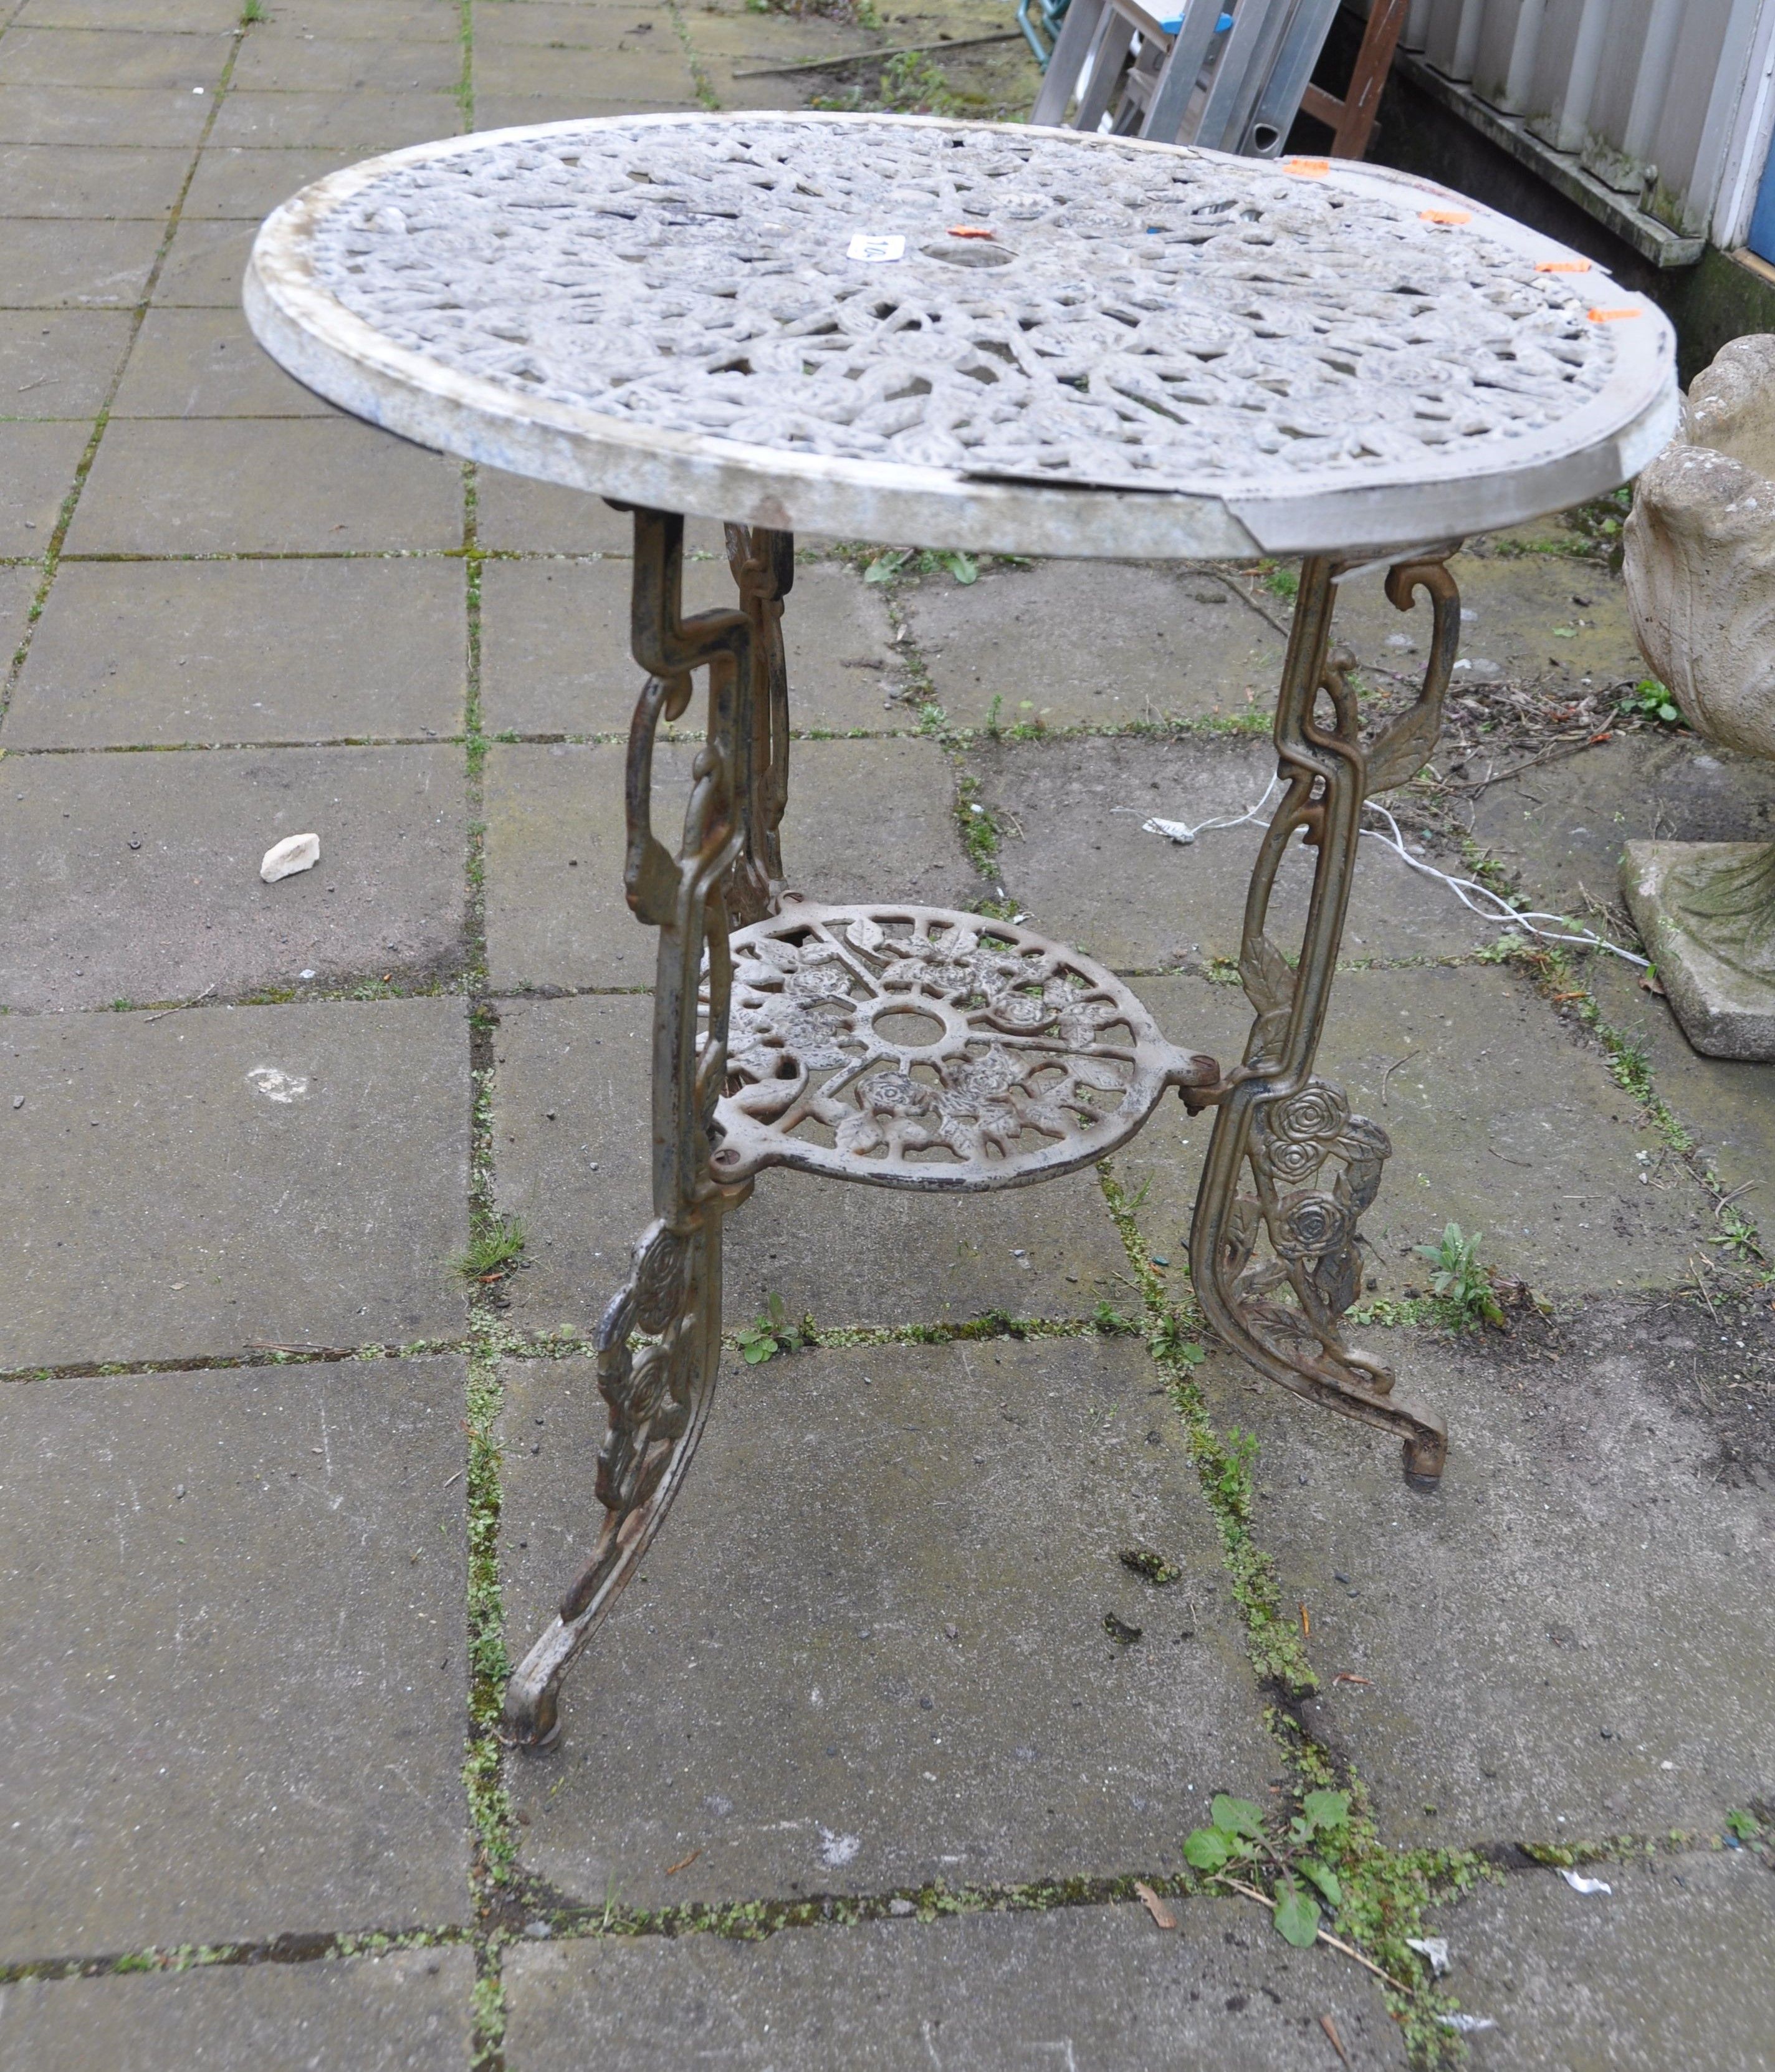 A MODERN CAST ALUMINIUM GARDEN TABLE with rose detail to 60cm diameter round top (Condition - Image 2 of 2